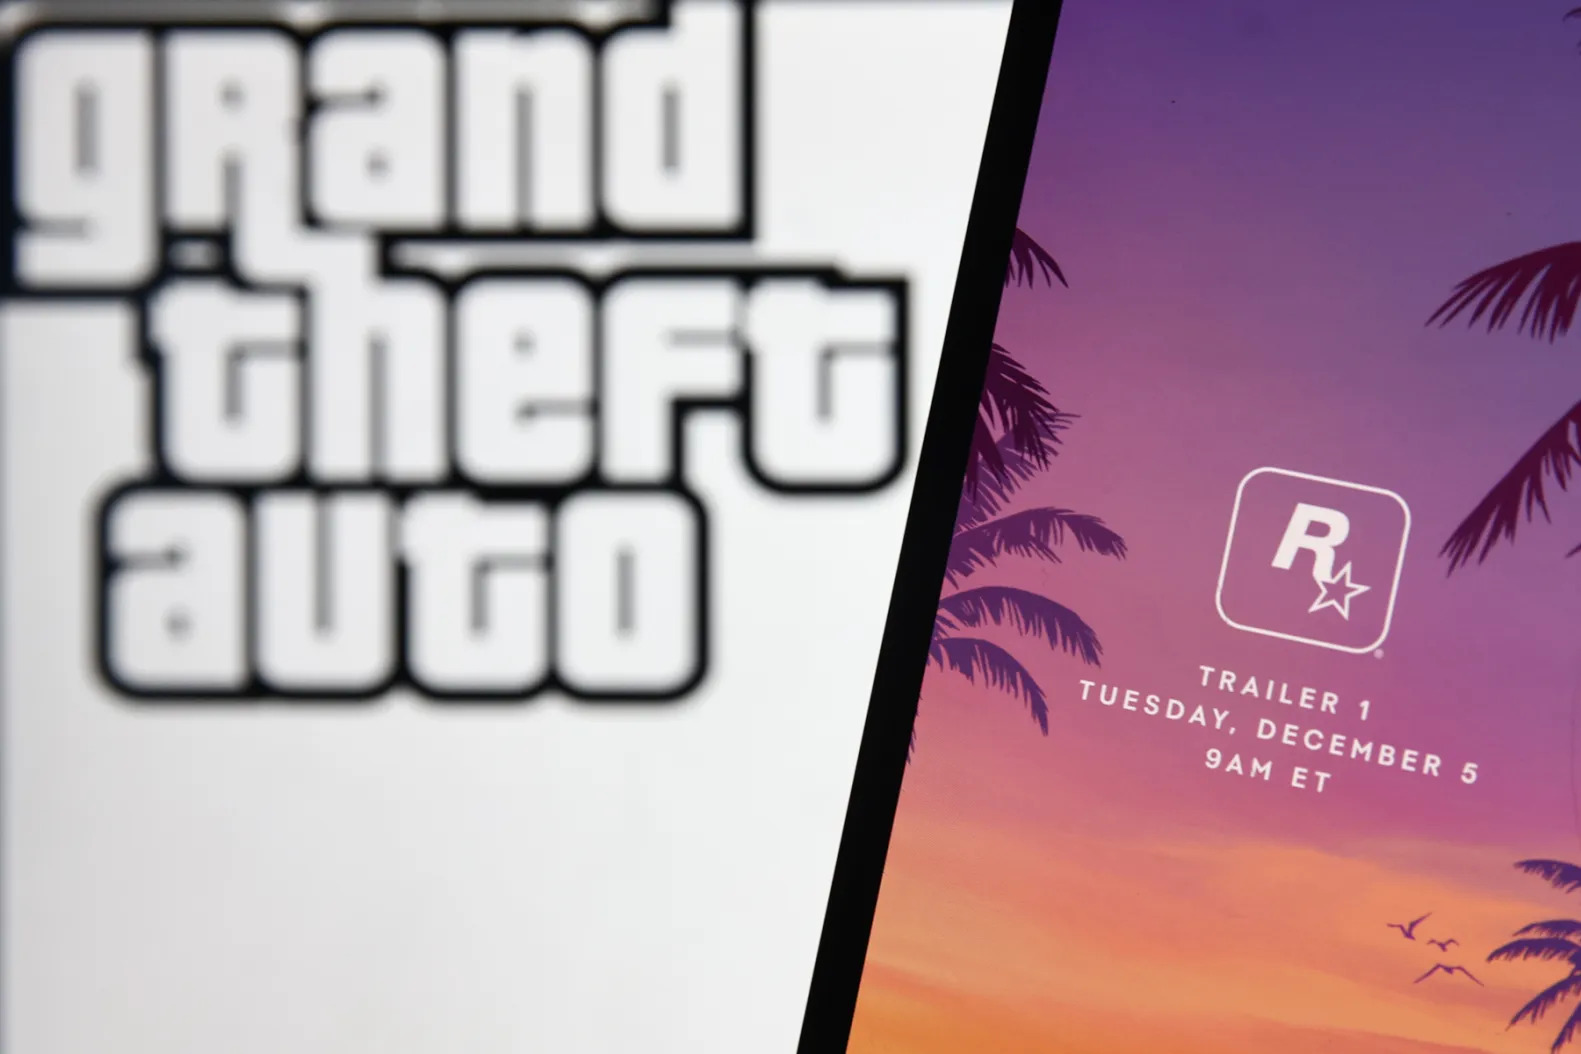 Grand Theft Auto 6' Trailer Reveals Franchise's First Female Protagonist